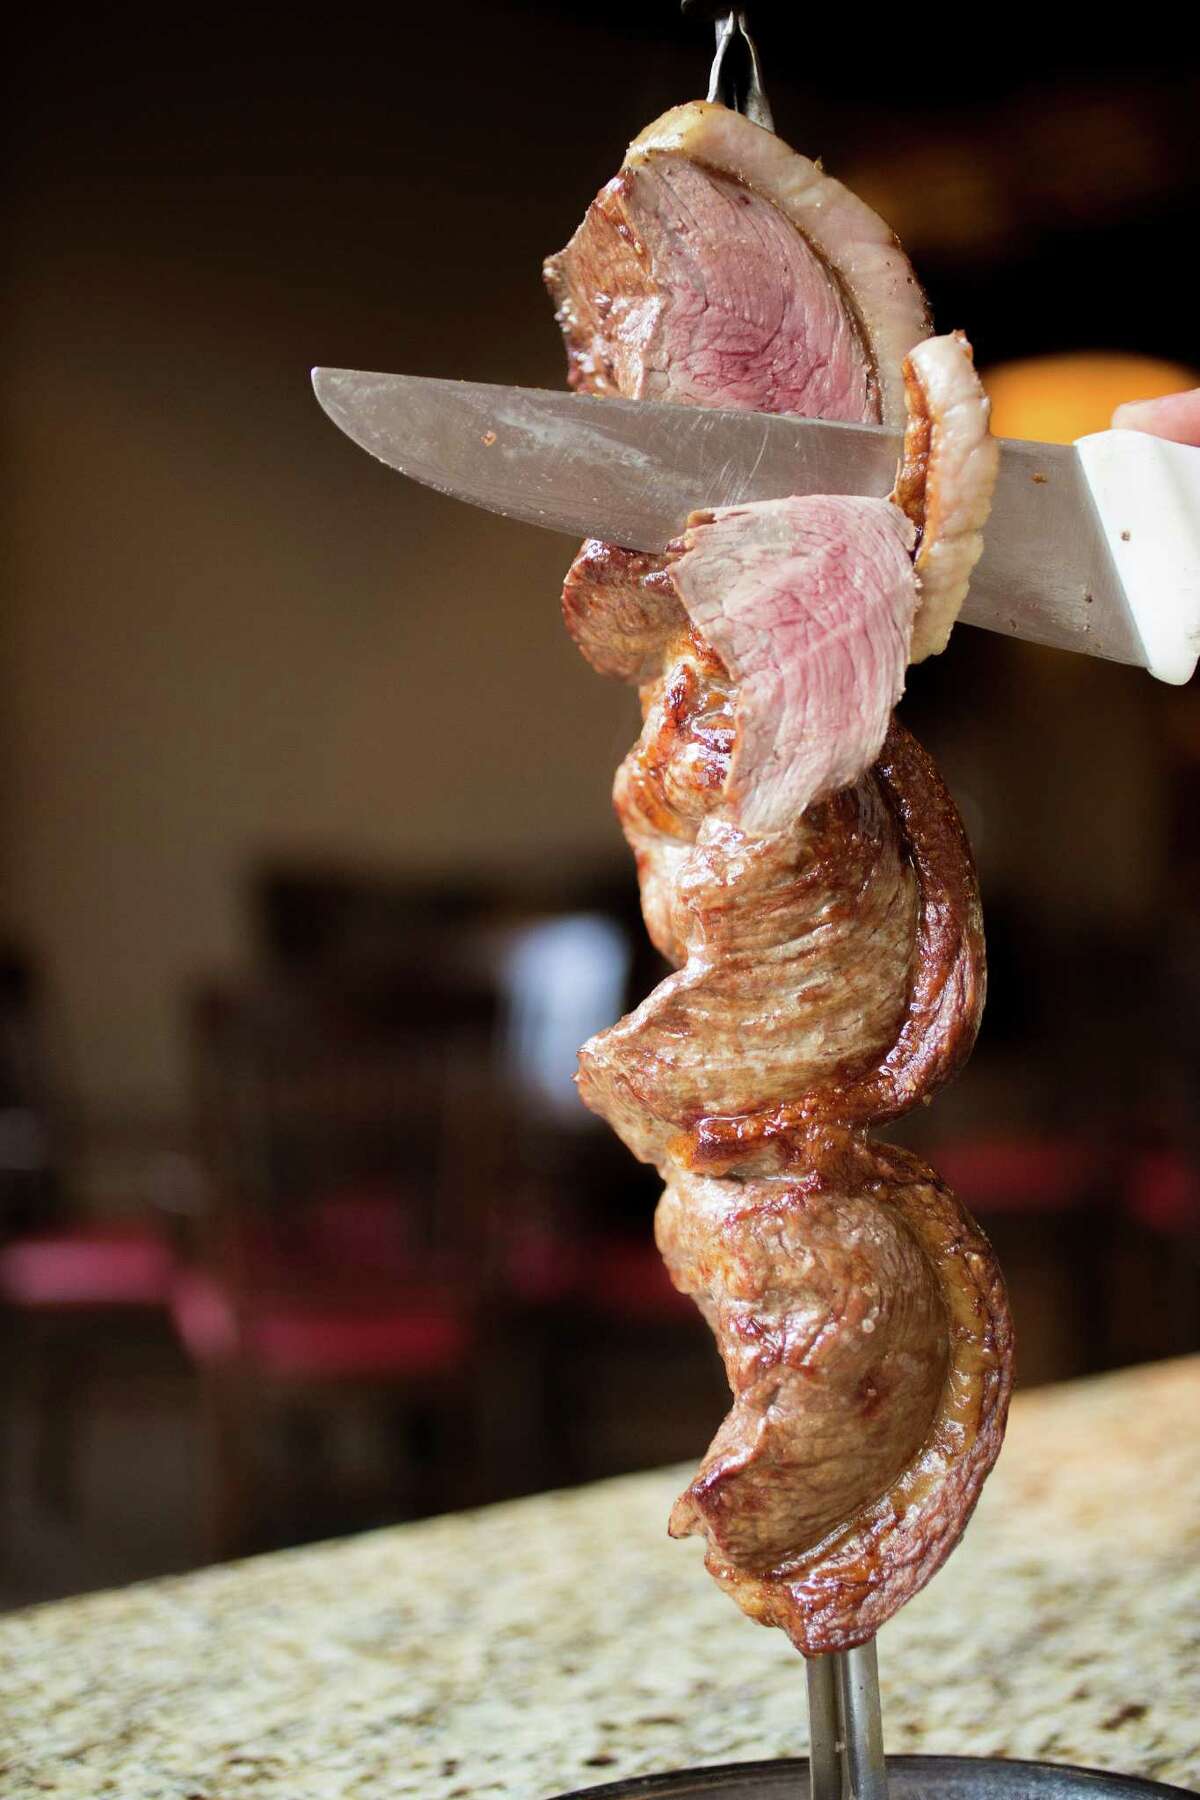 Meat is sliced right off the skewer at Chama Gaúcha.